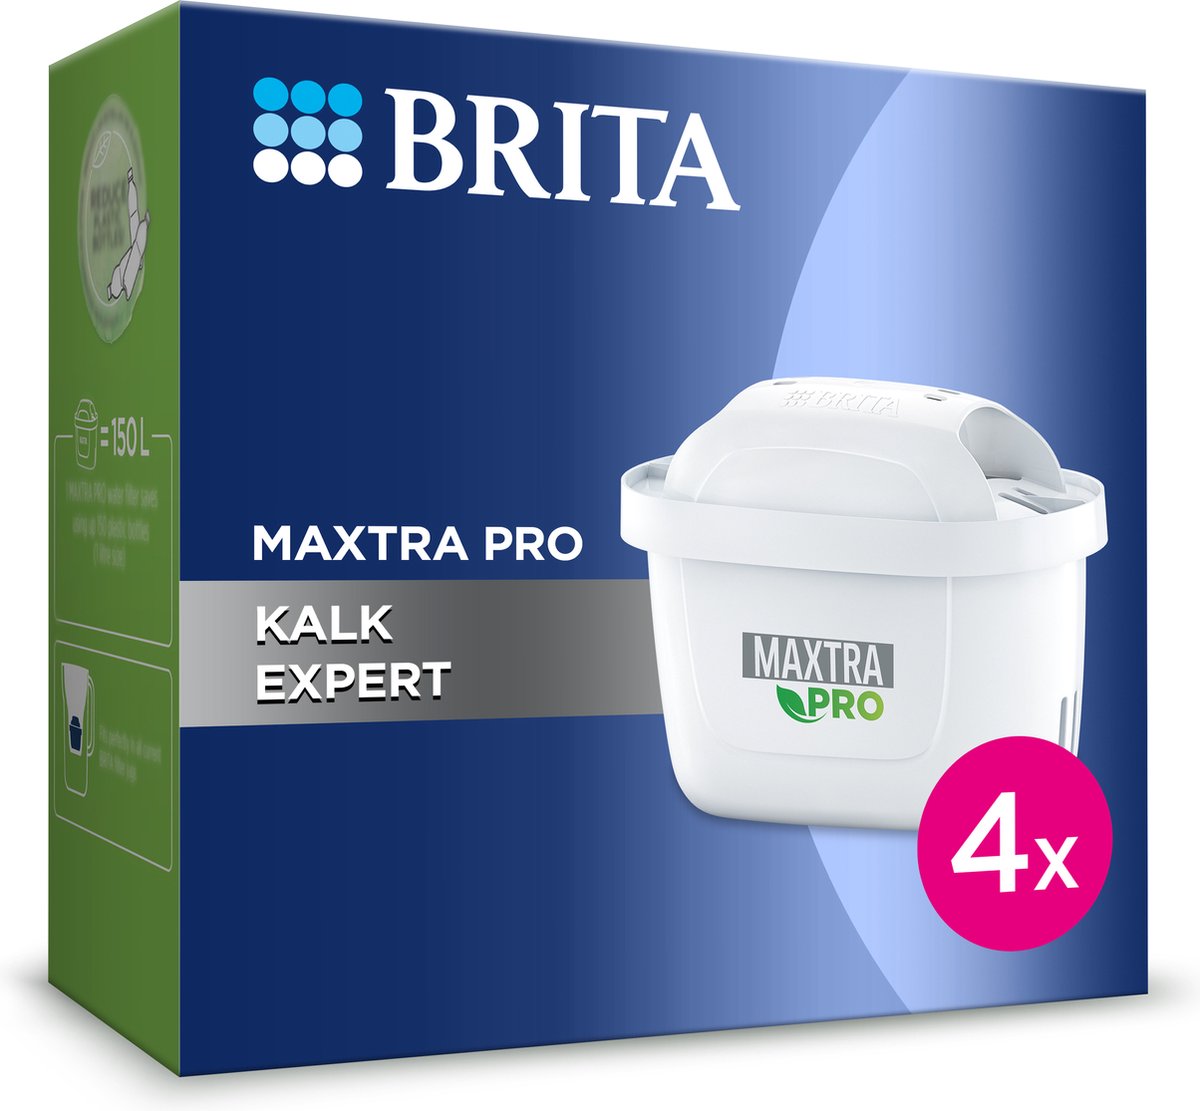 Brita - Waterfilterpatroon - MAXTRA Pro Limescale Expert - 4Pack